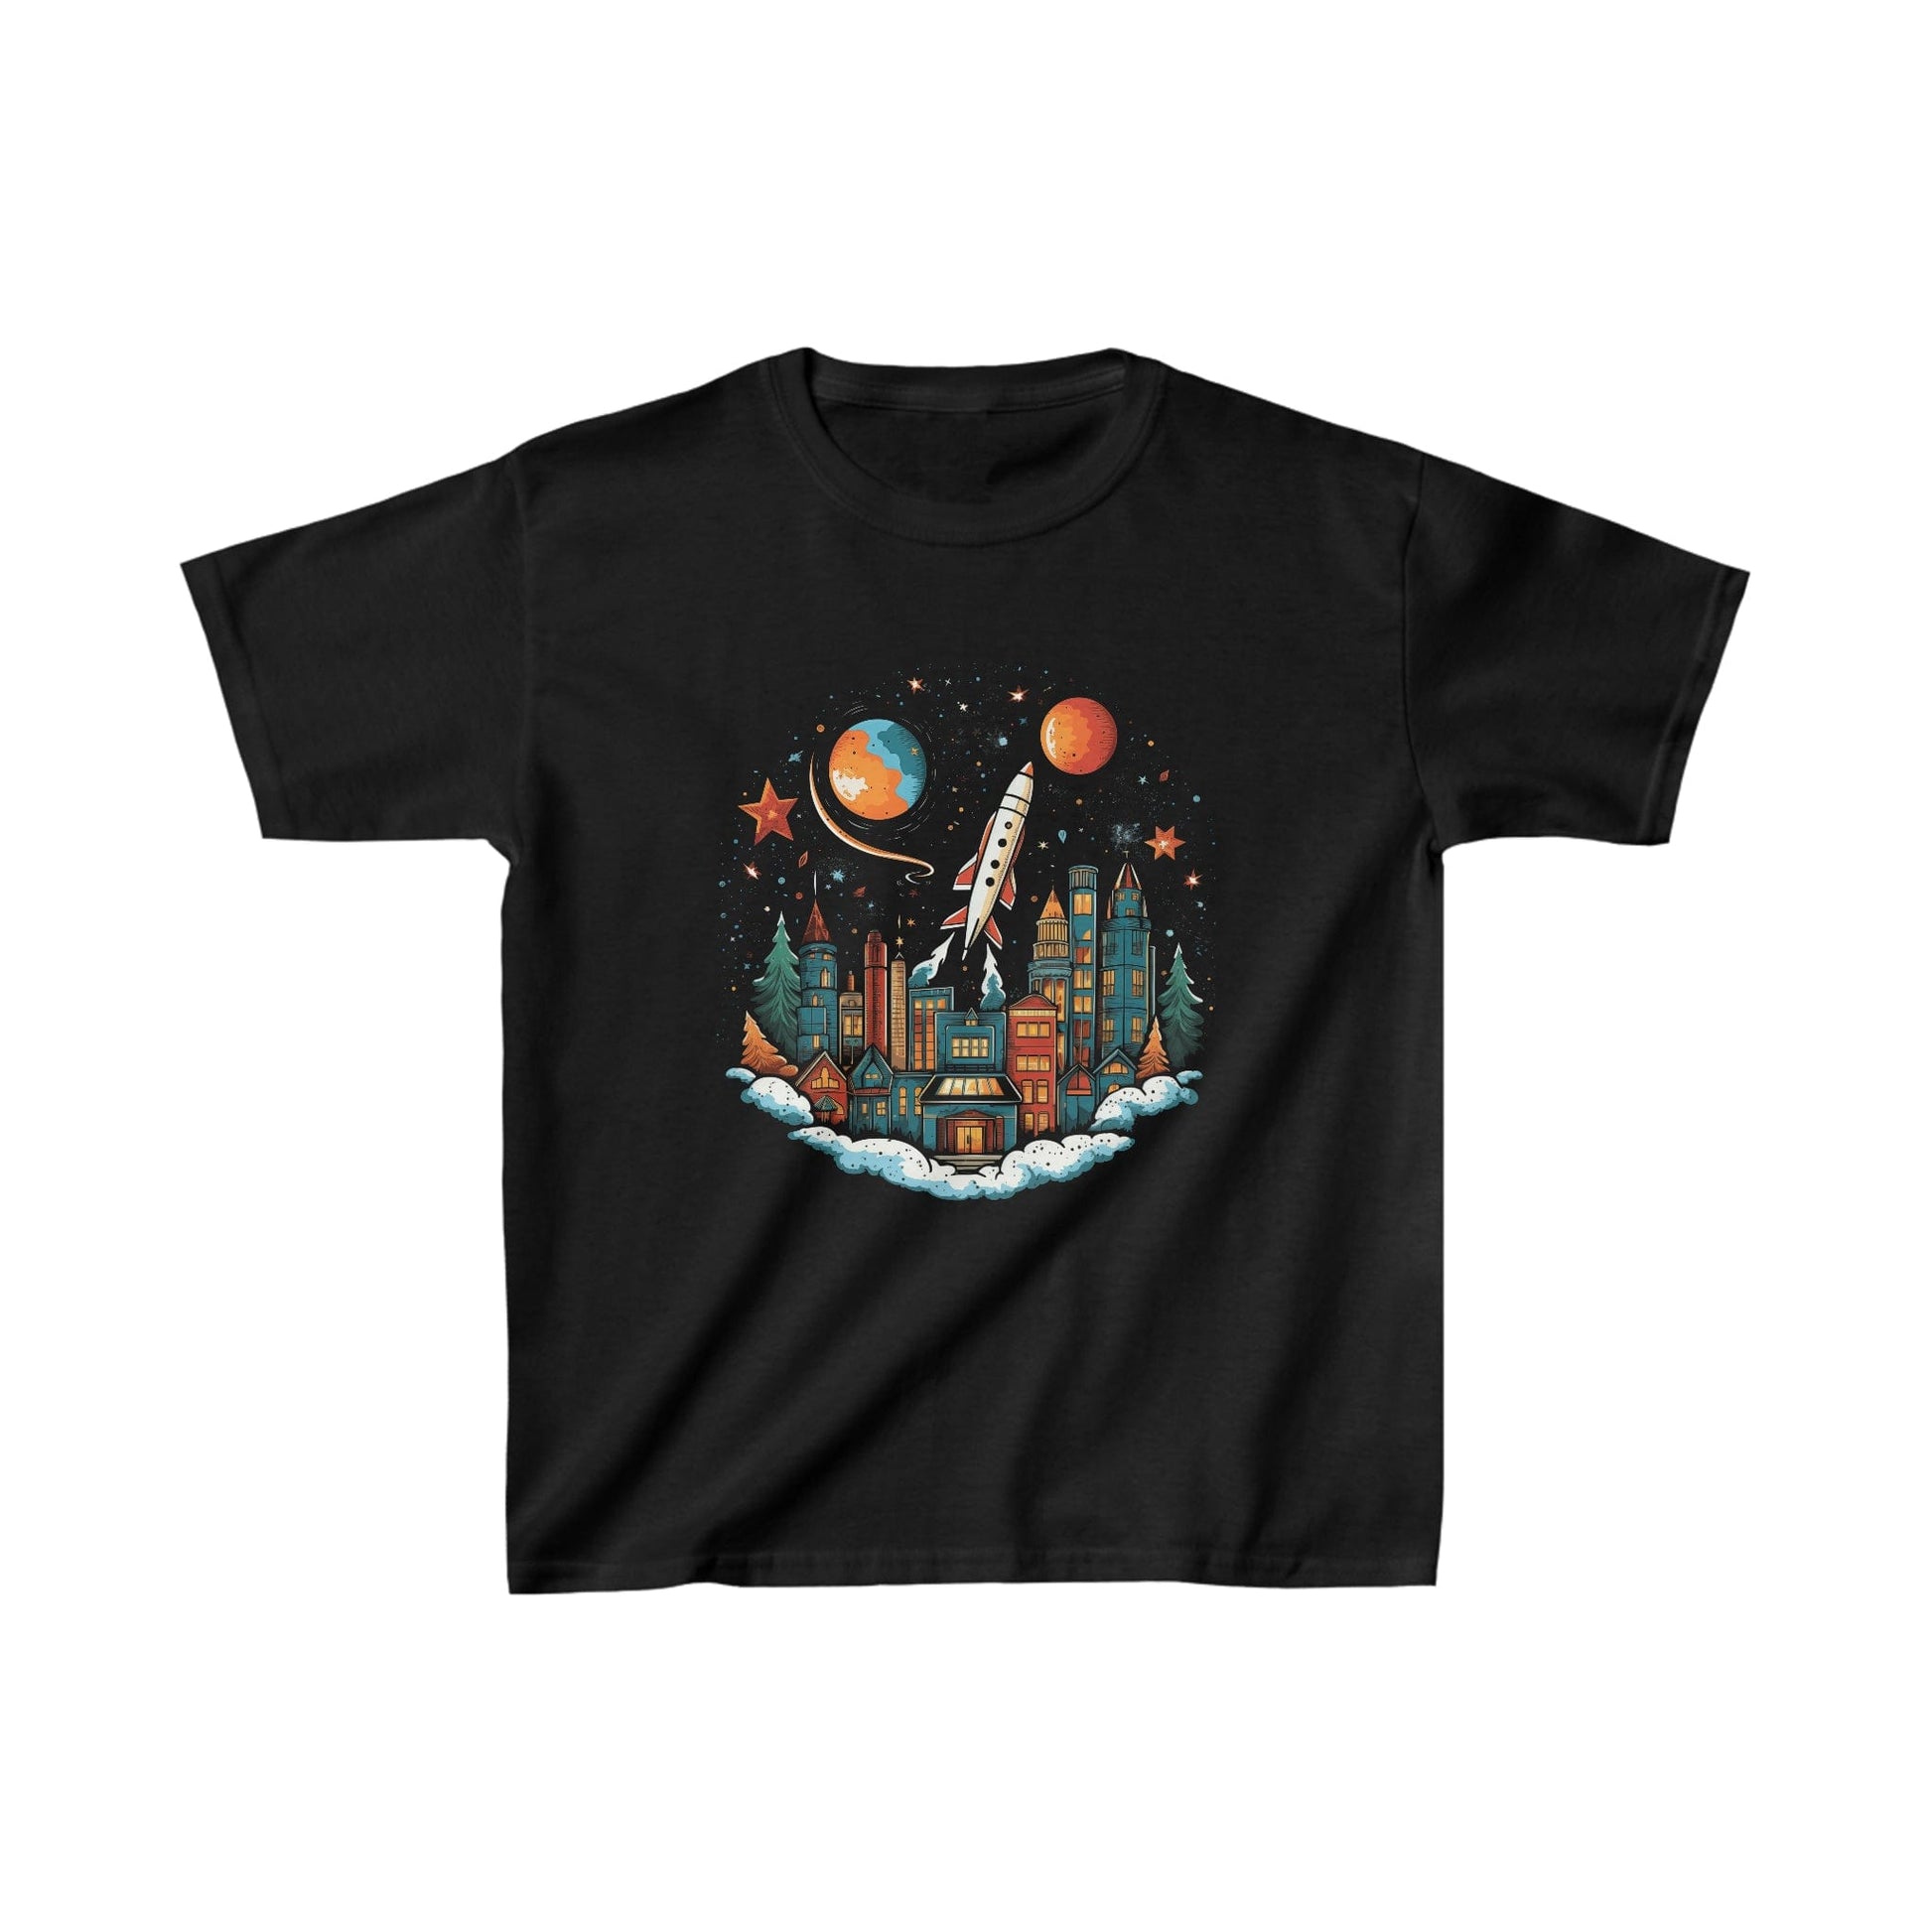 Kids clothes XS / Black Youth Holiday Rocket Launch T-Shirt